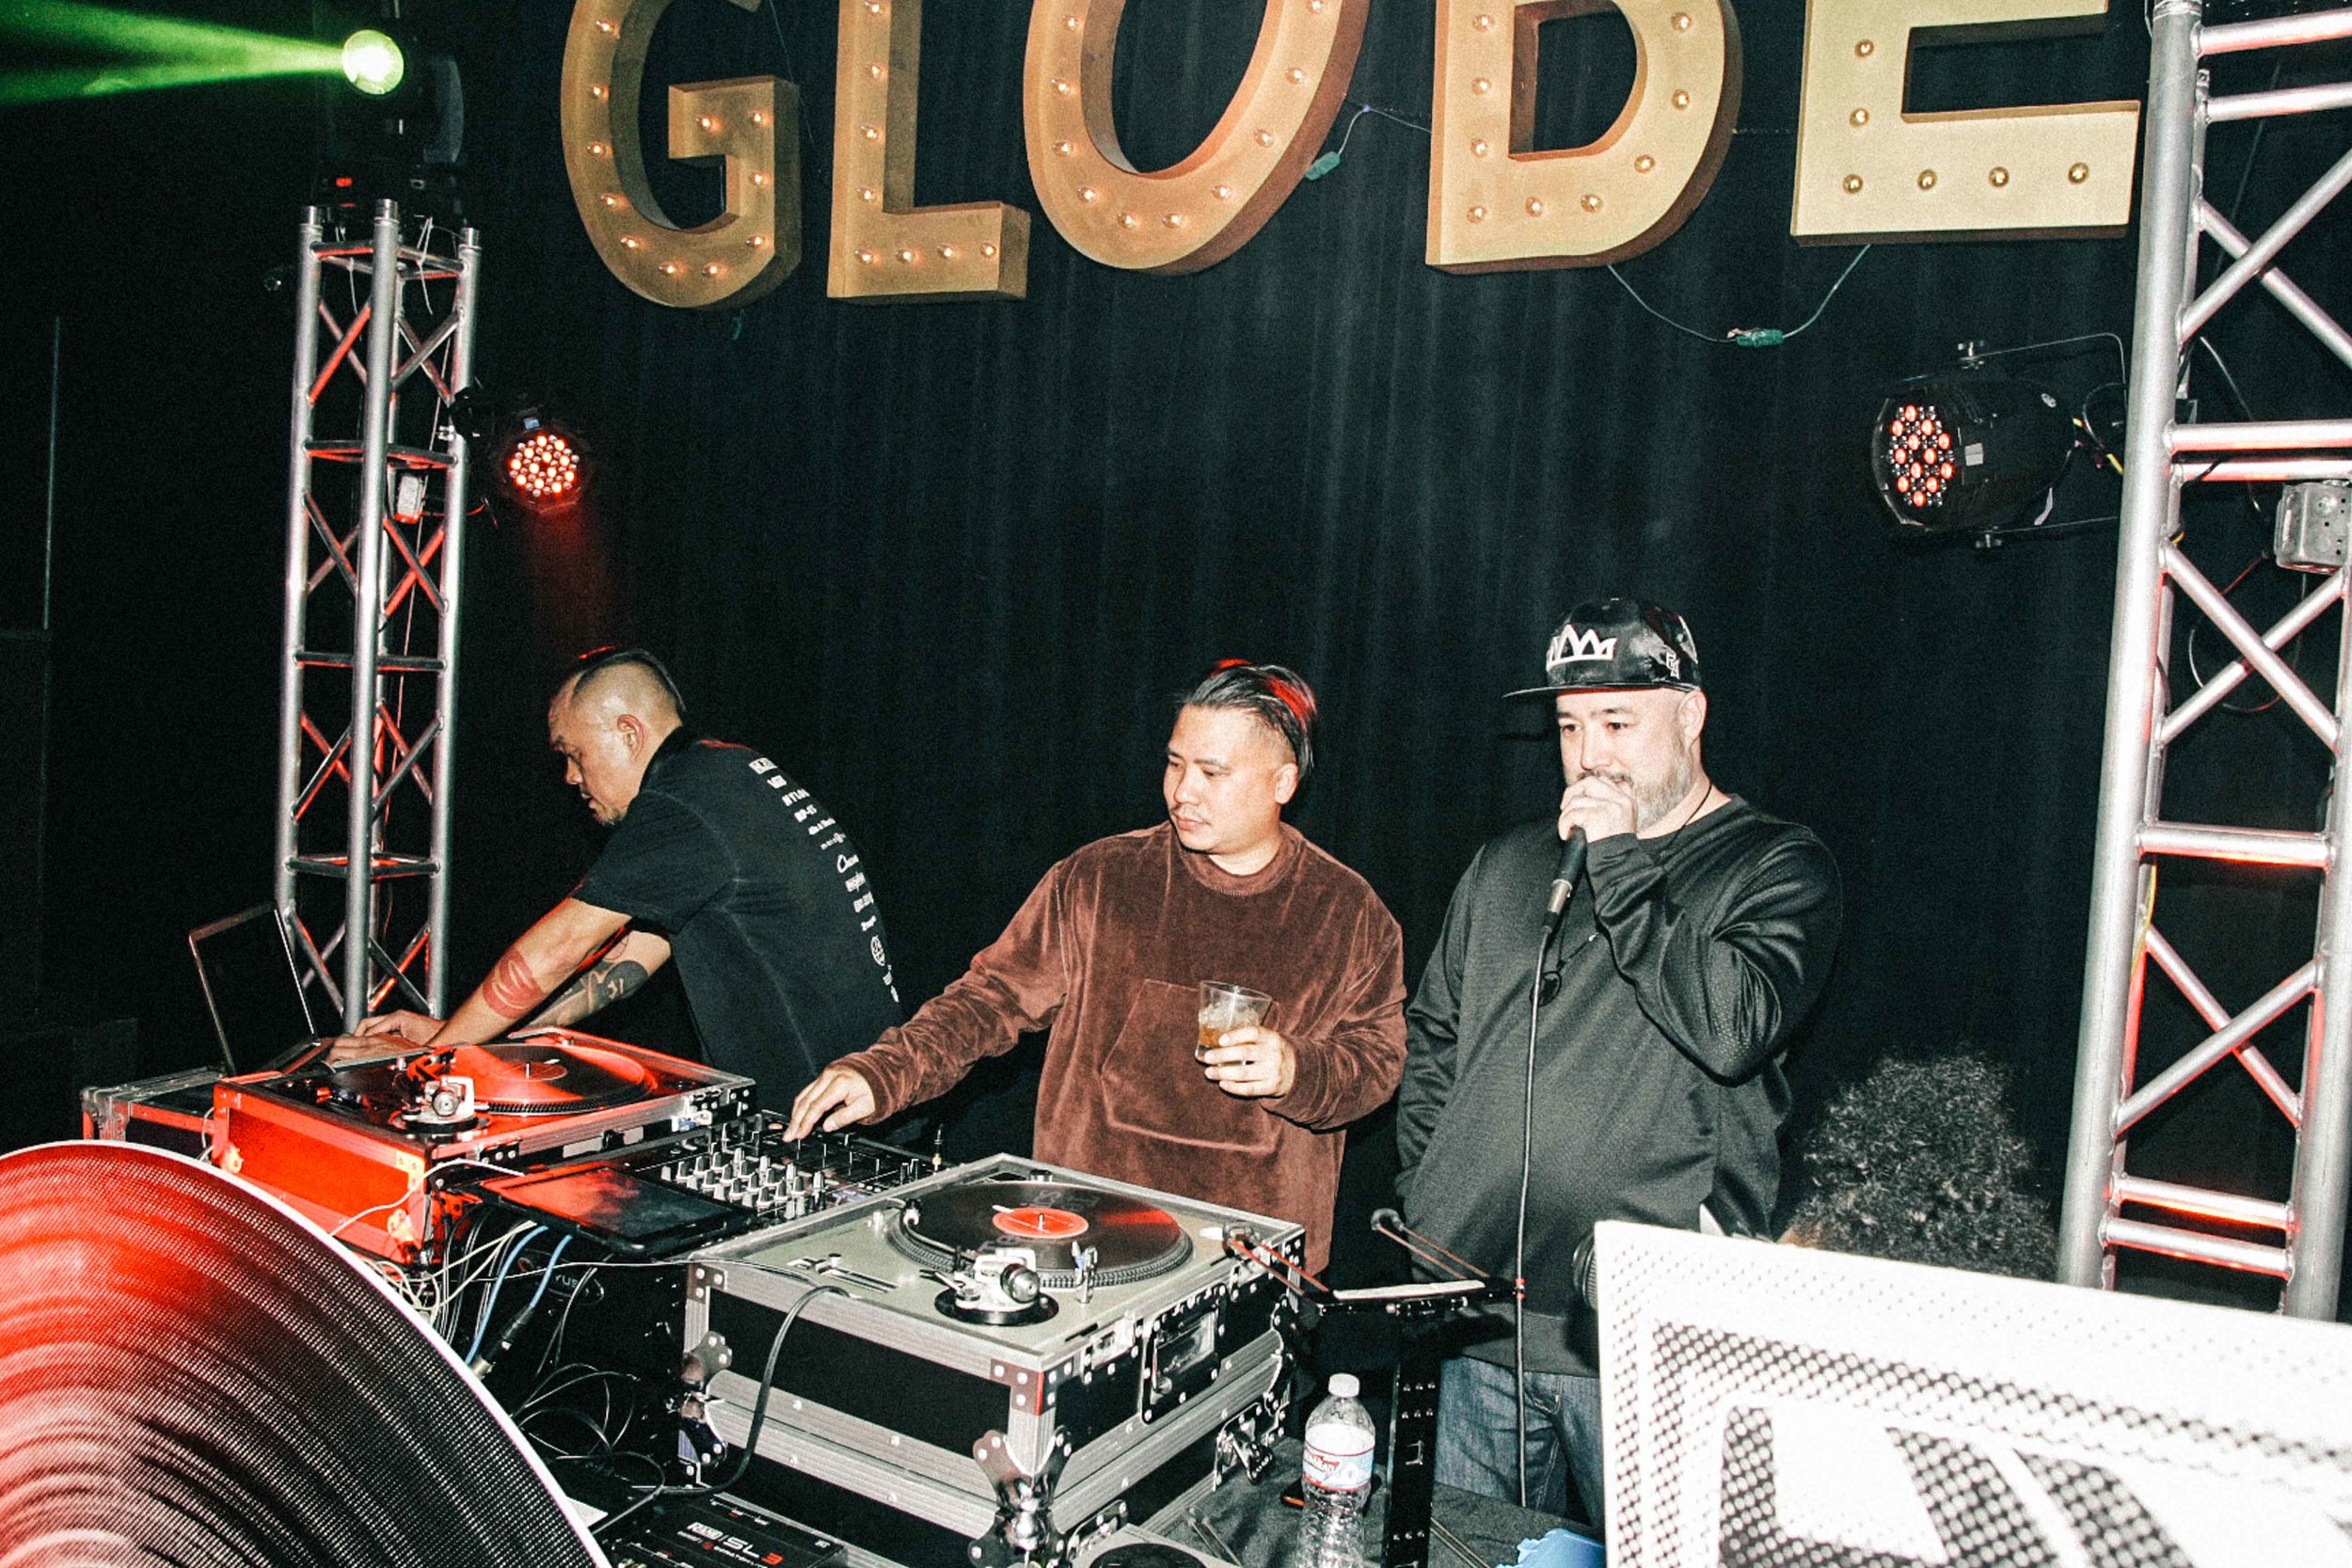  Bam Barcena (center) assisting Mr. Hek at the ISSUE 06 Release Party x 10YR HLZBLZ Anniversary (Feb 11) at Globe Theater. / Photo: © Jonathan Tate for SUSPEND Magazine. 